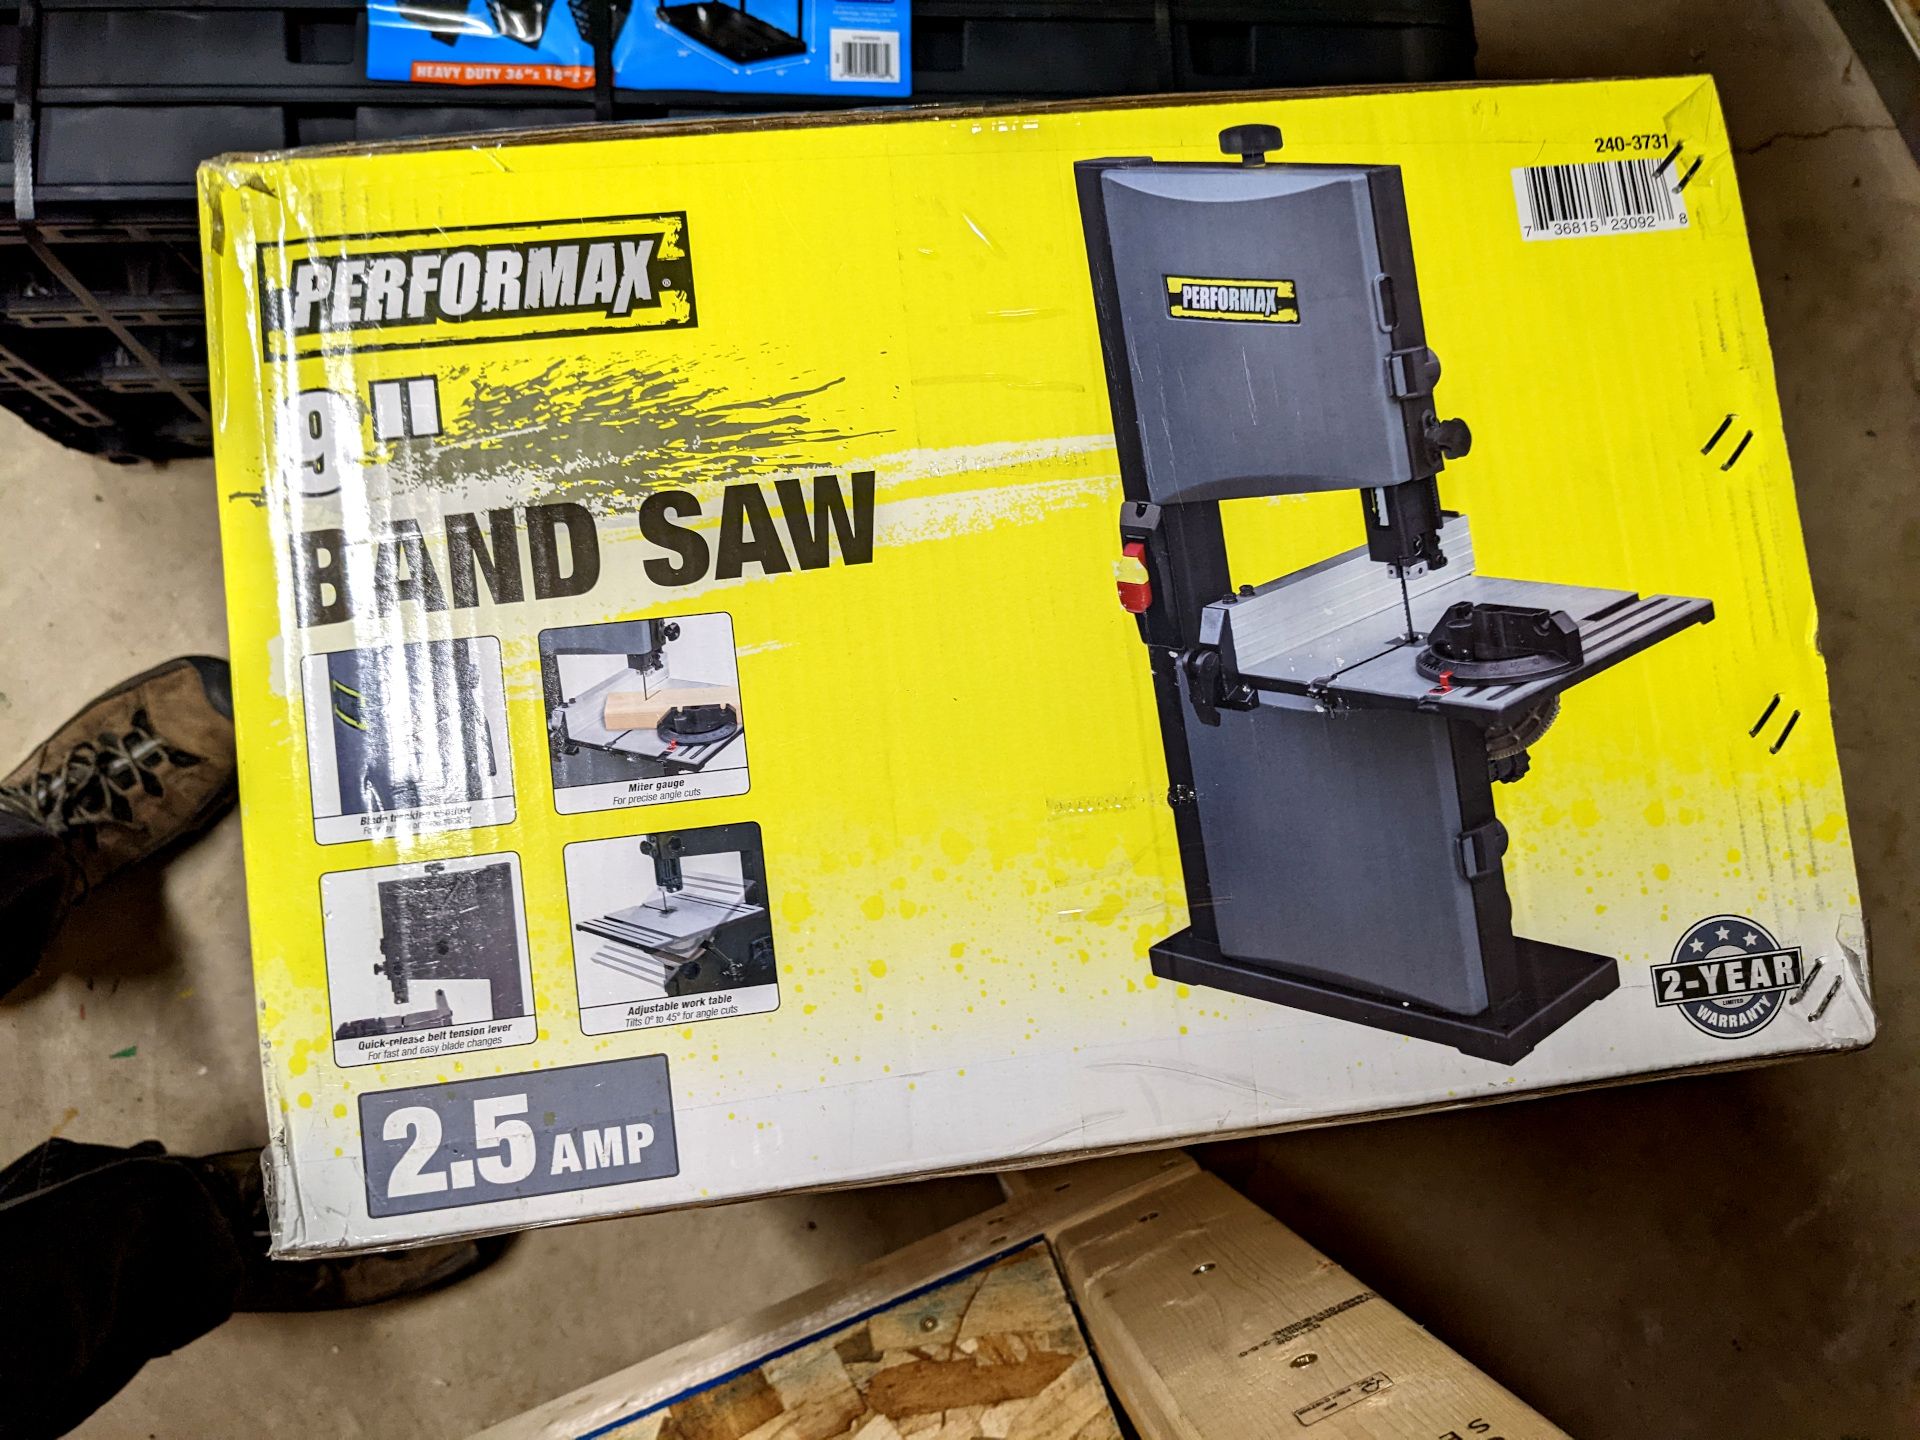 A Performax 9" band saw